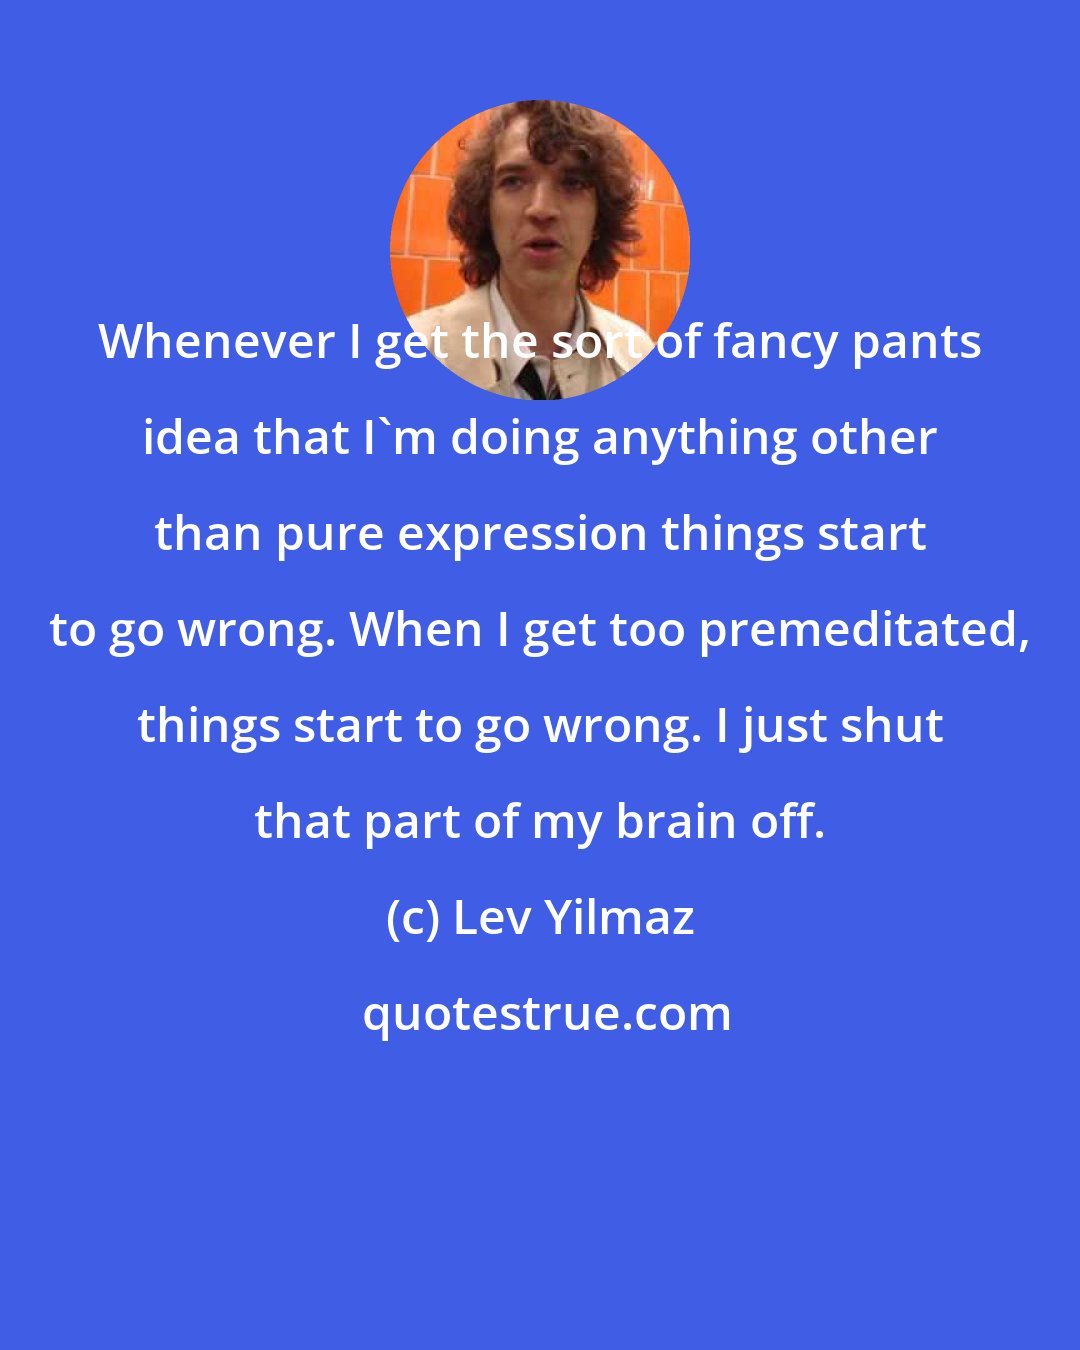 Lev Yilmaz: Whenever I get the sort of fancy pants idea that I'm doing anything other than pure expression things start to go wrong. When I get too premeditated, things start to go wrong. I just shut that part of my brain off.